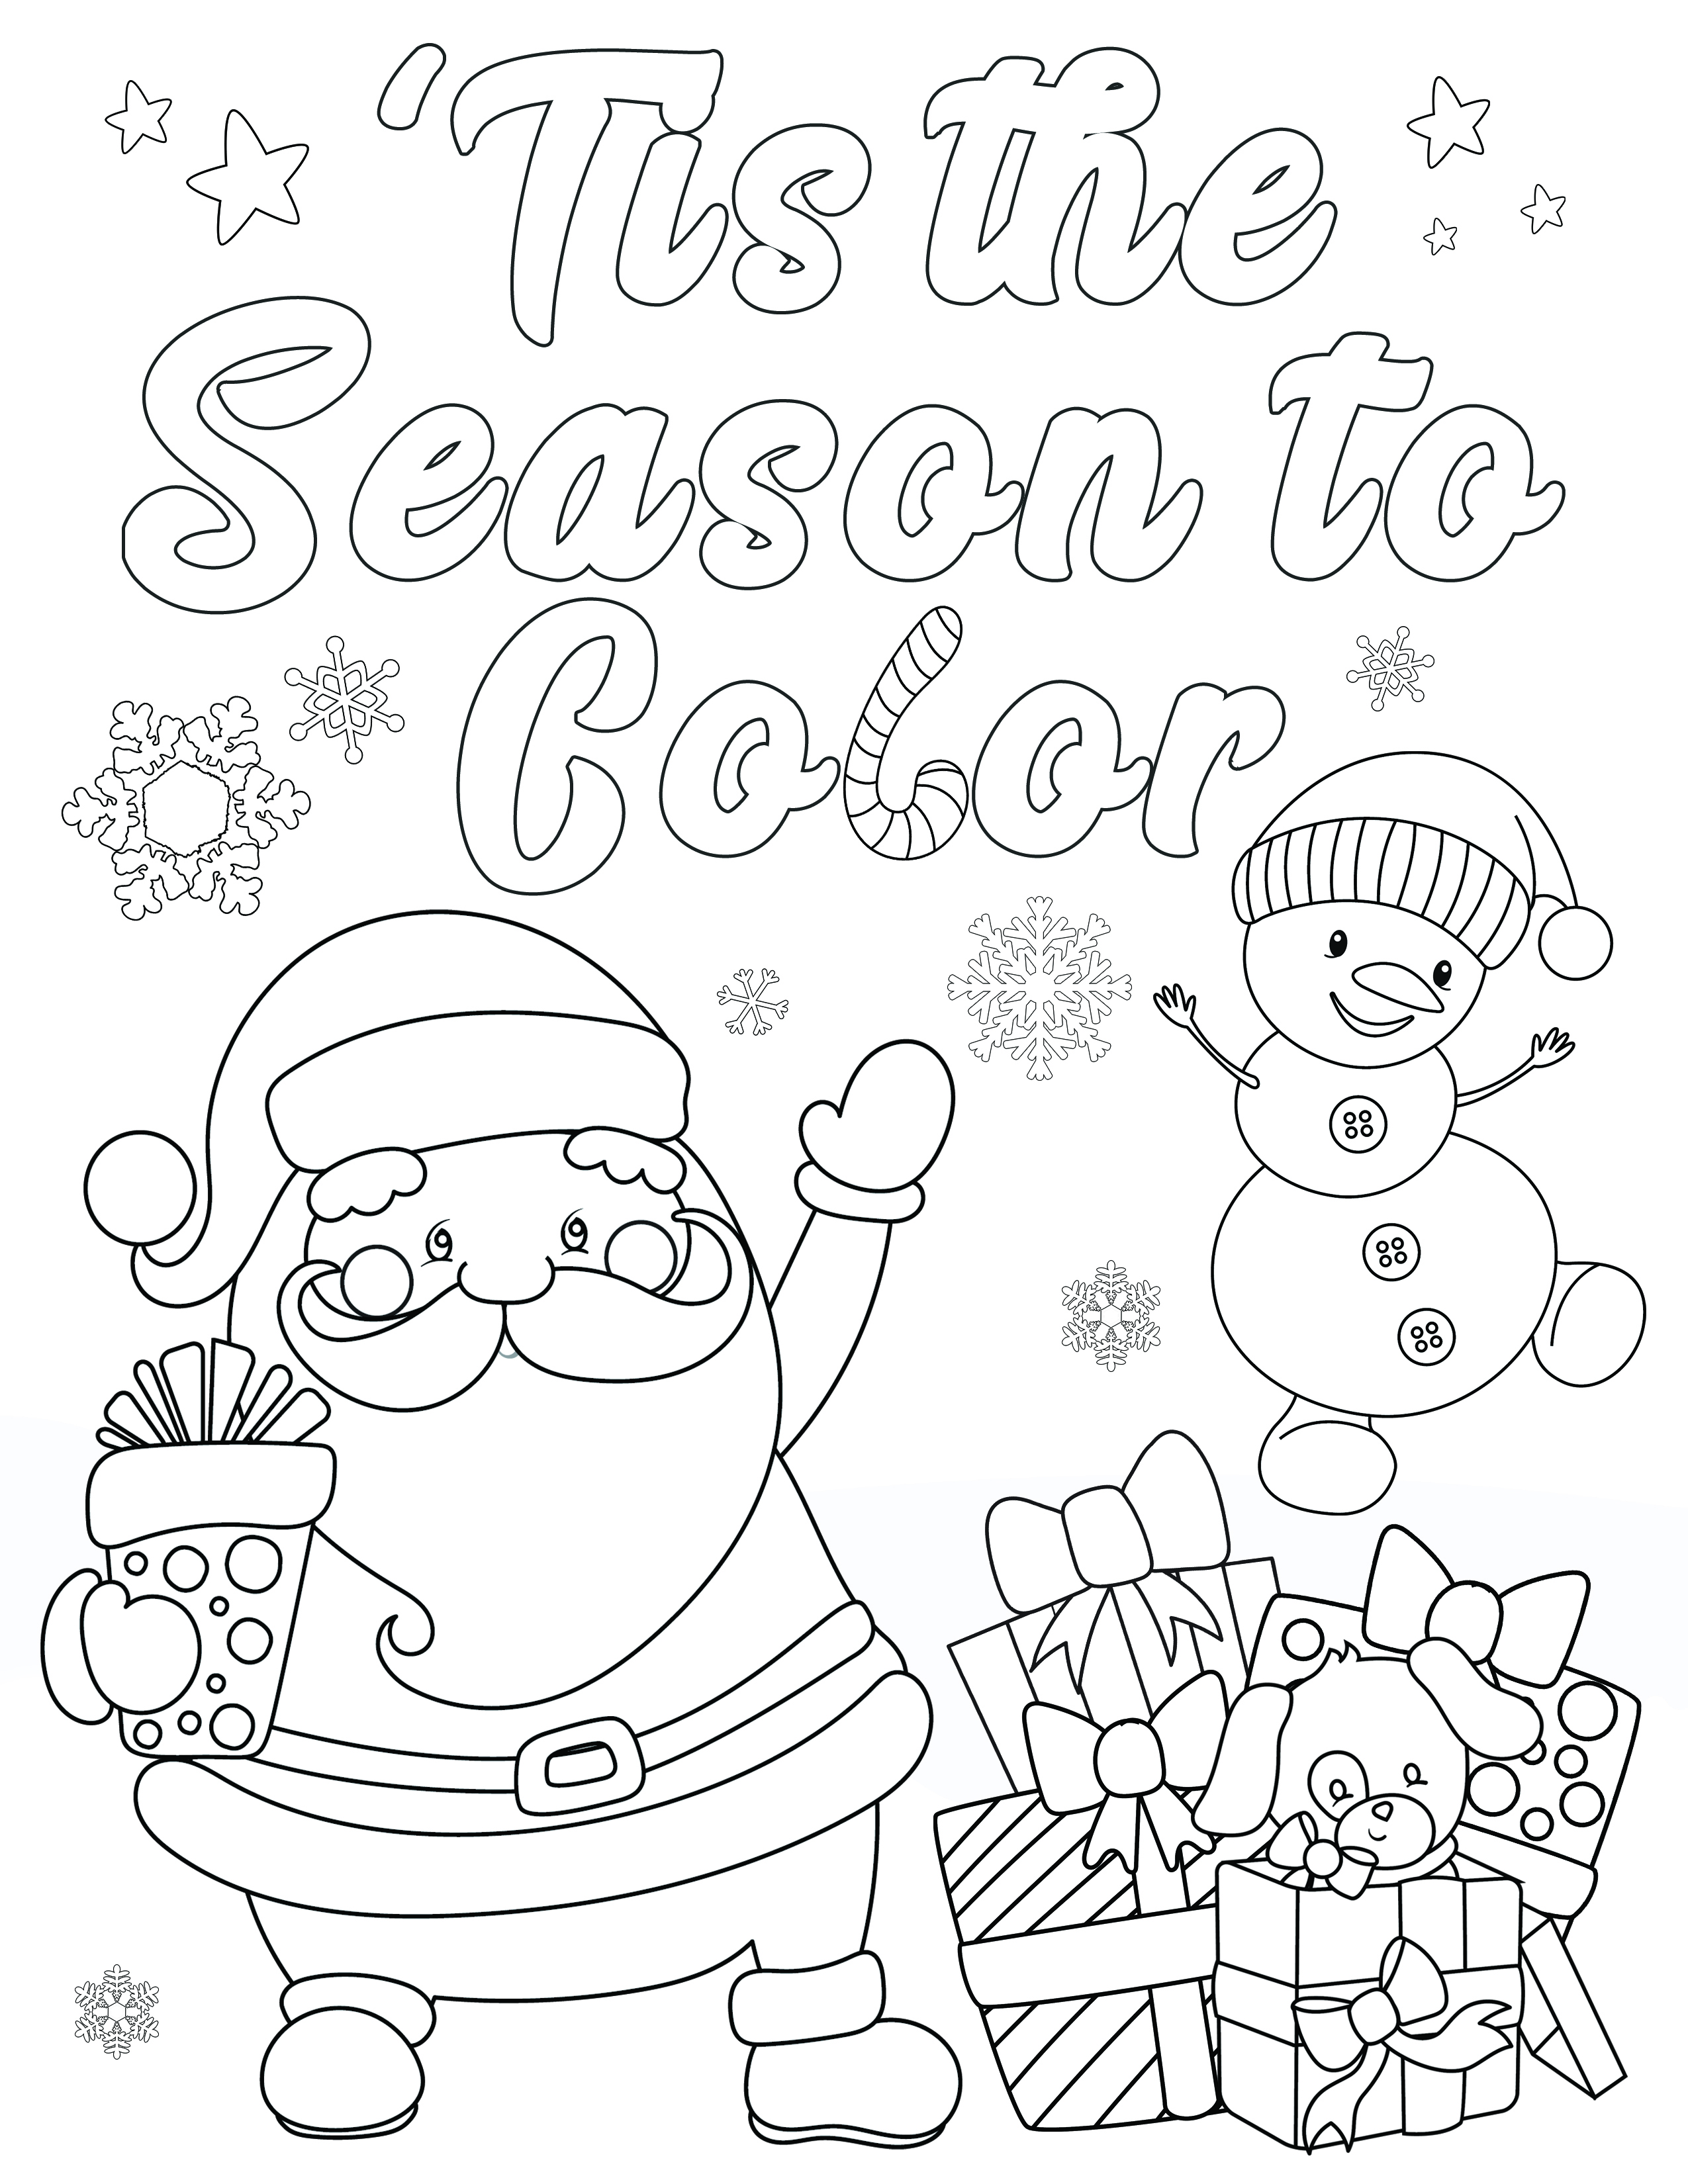 FREE Christmas Coloring Page Tis The Season To Color Happiness Is Homemade